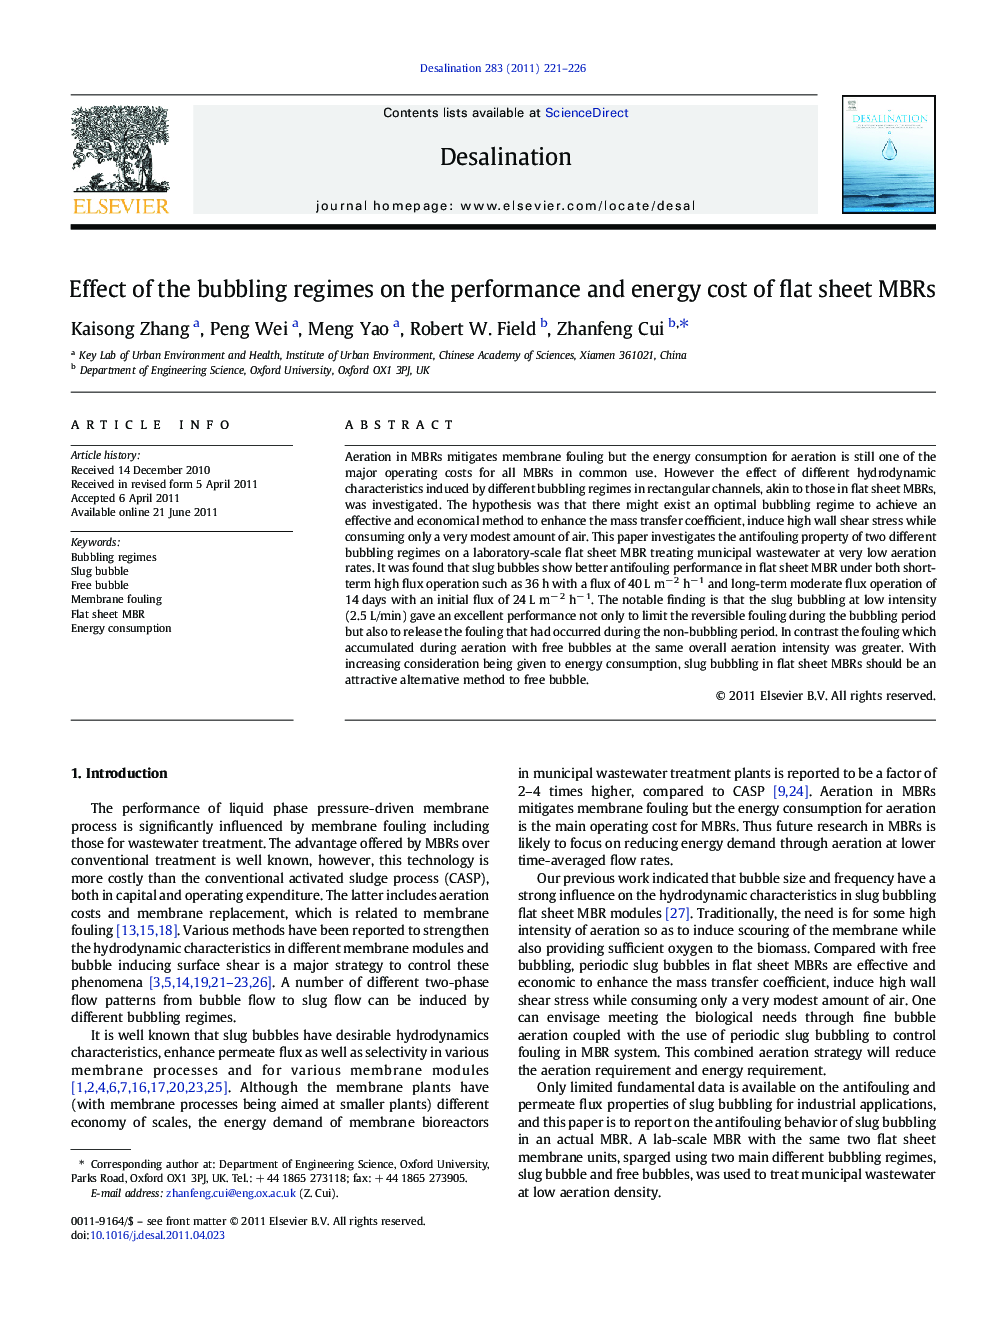 Effect of the bubbling regimes on the performance and energy cost of flat sheet MBRs